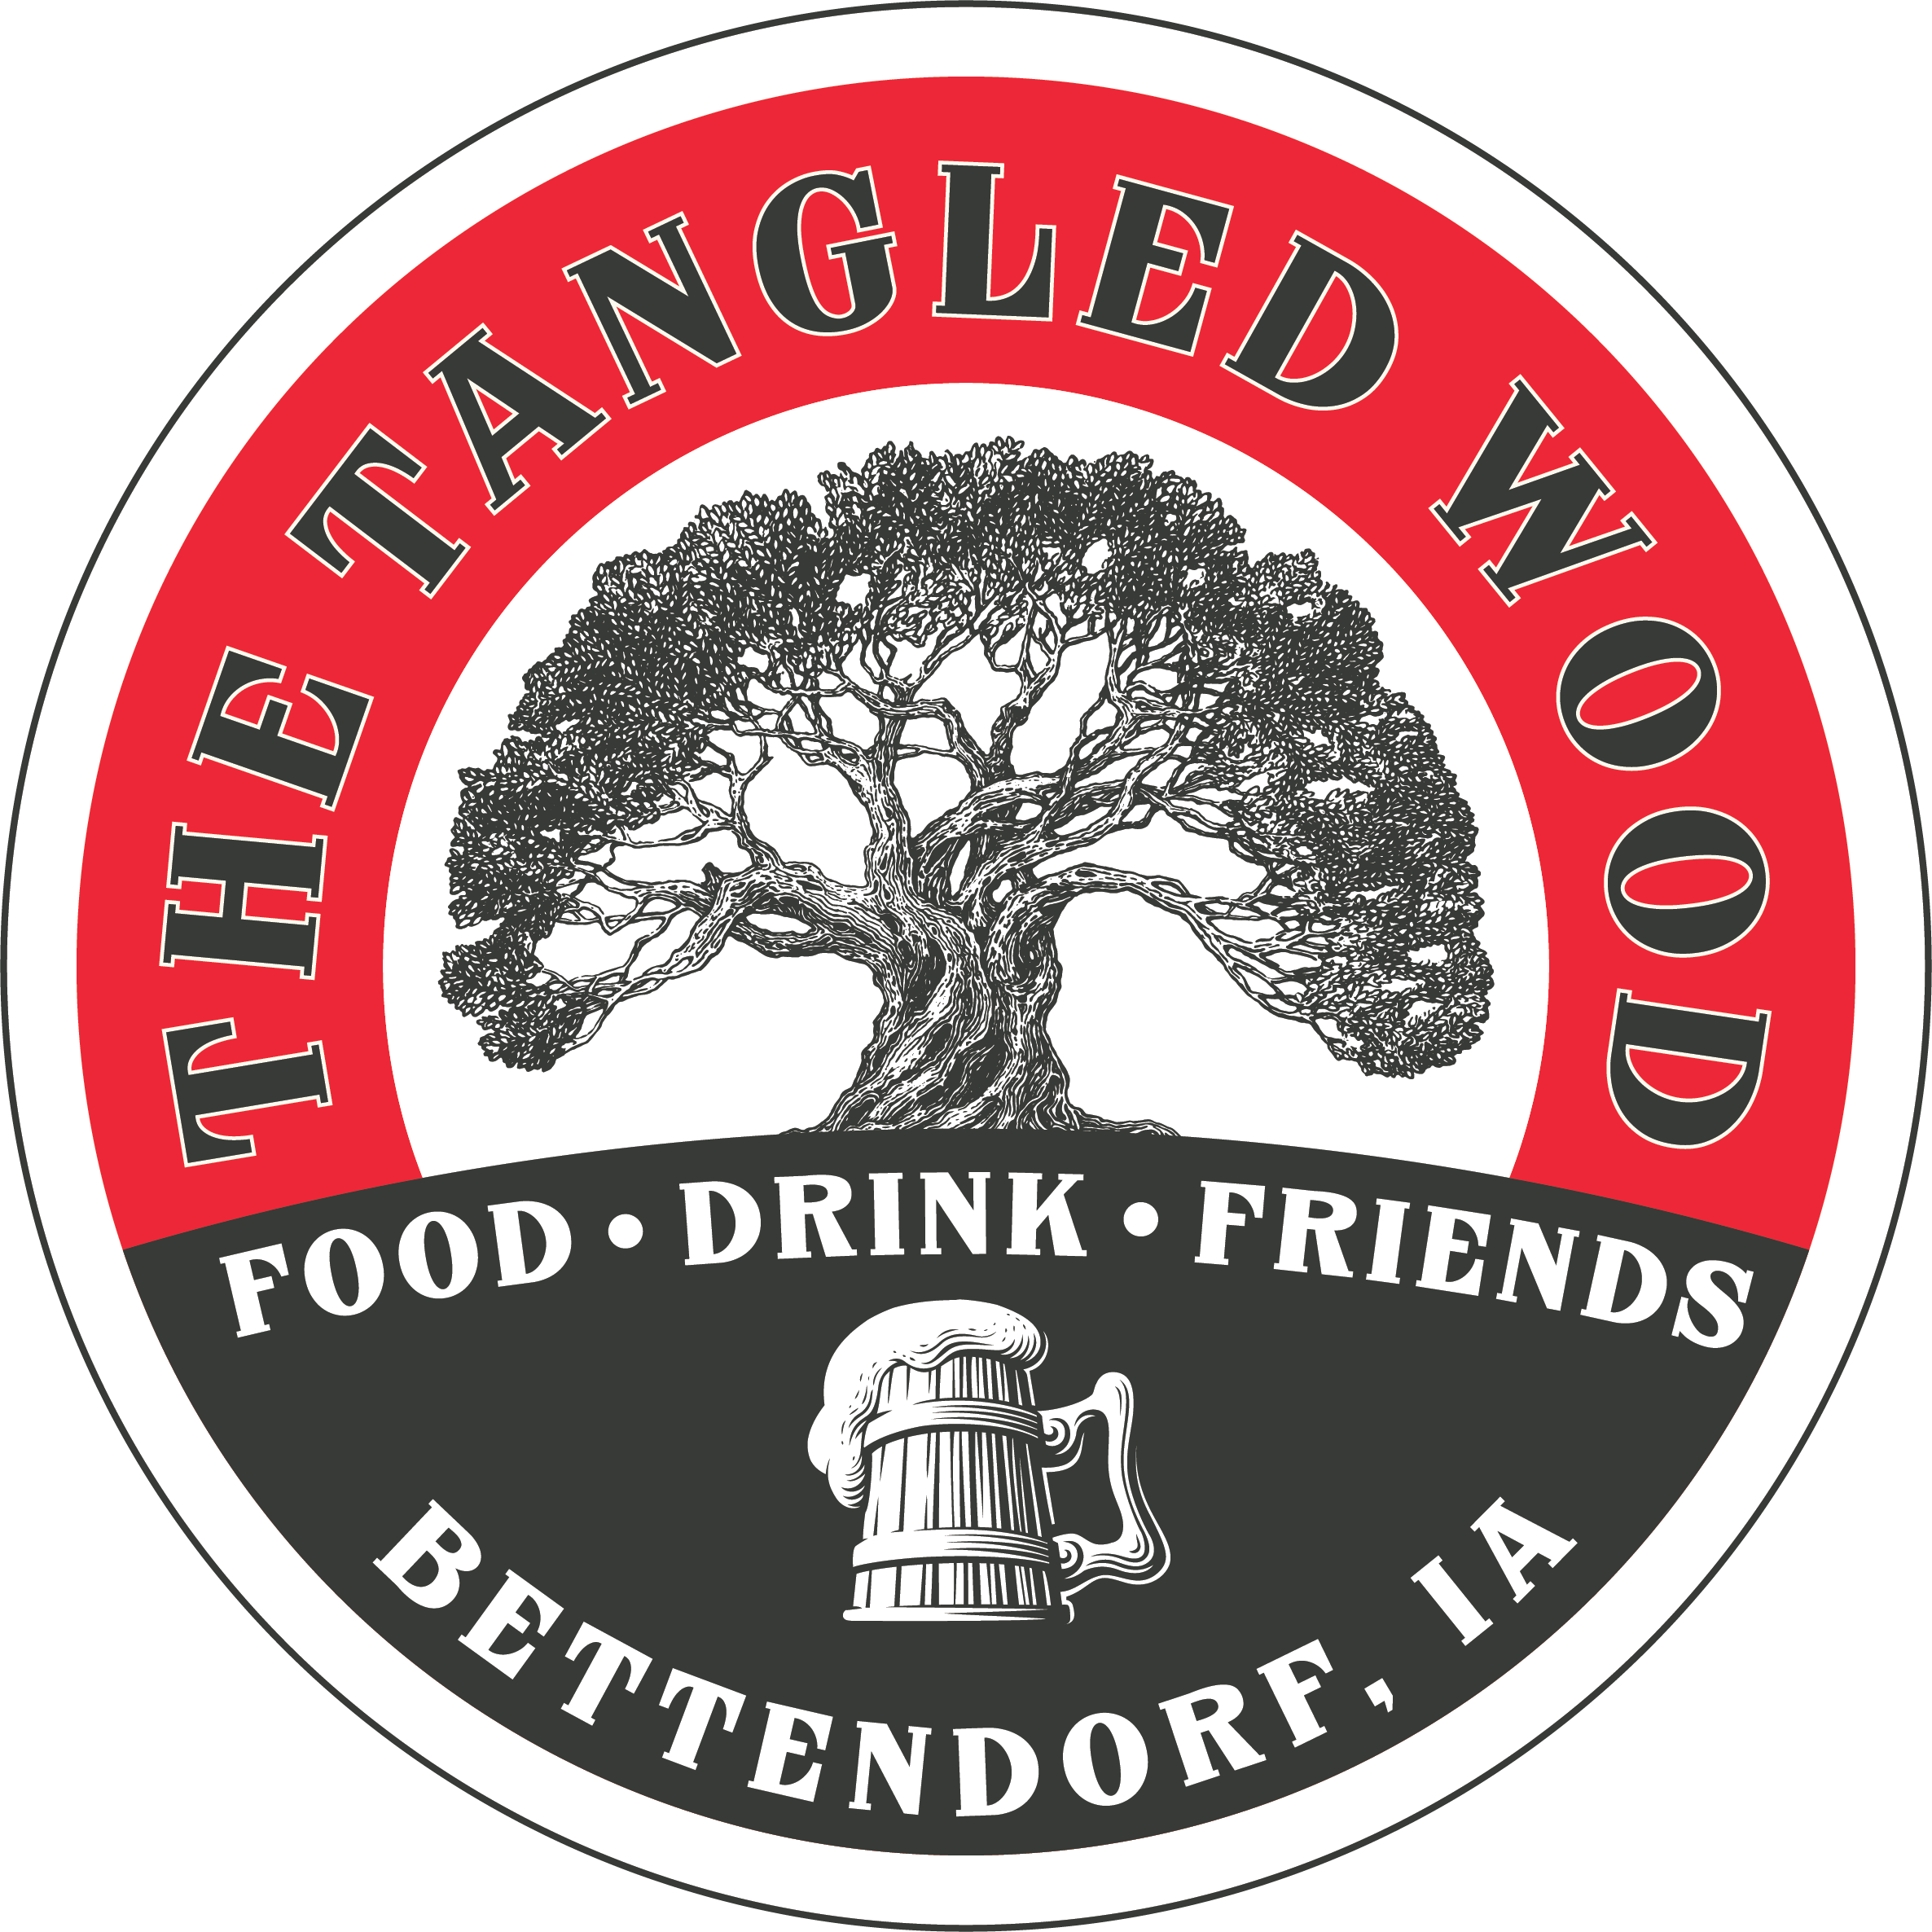 The Tangled Wood FOOD DRINK FRIENDS